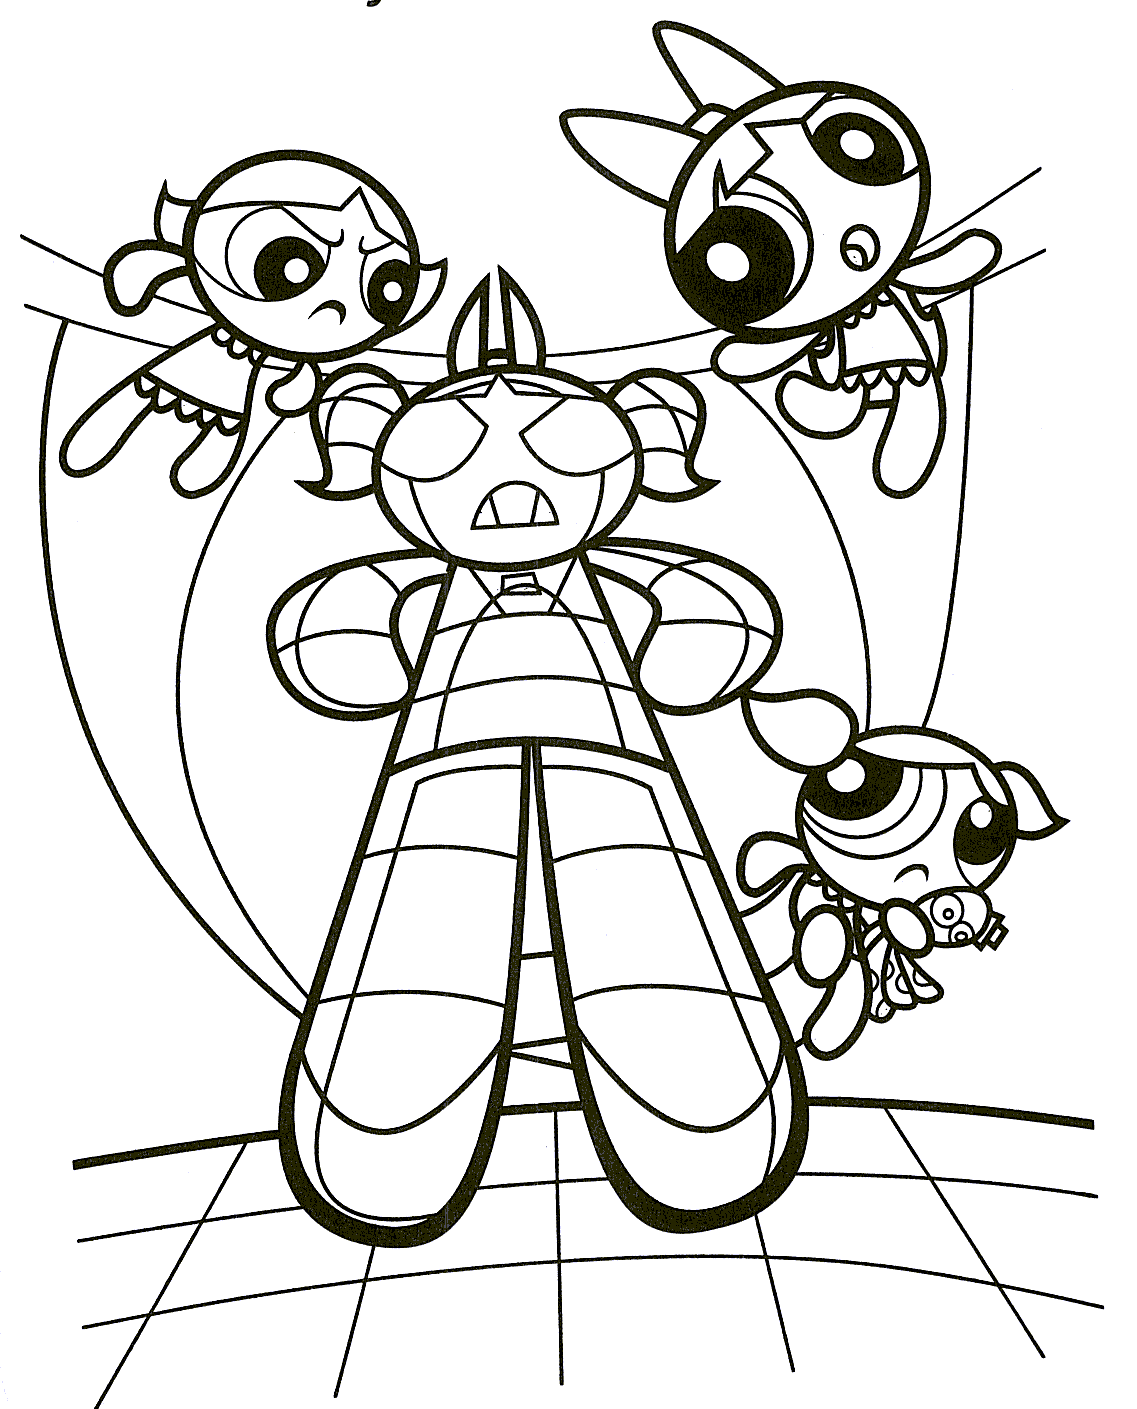 Download Free Printable Powerpuff Girls Coloring Pages For Kids